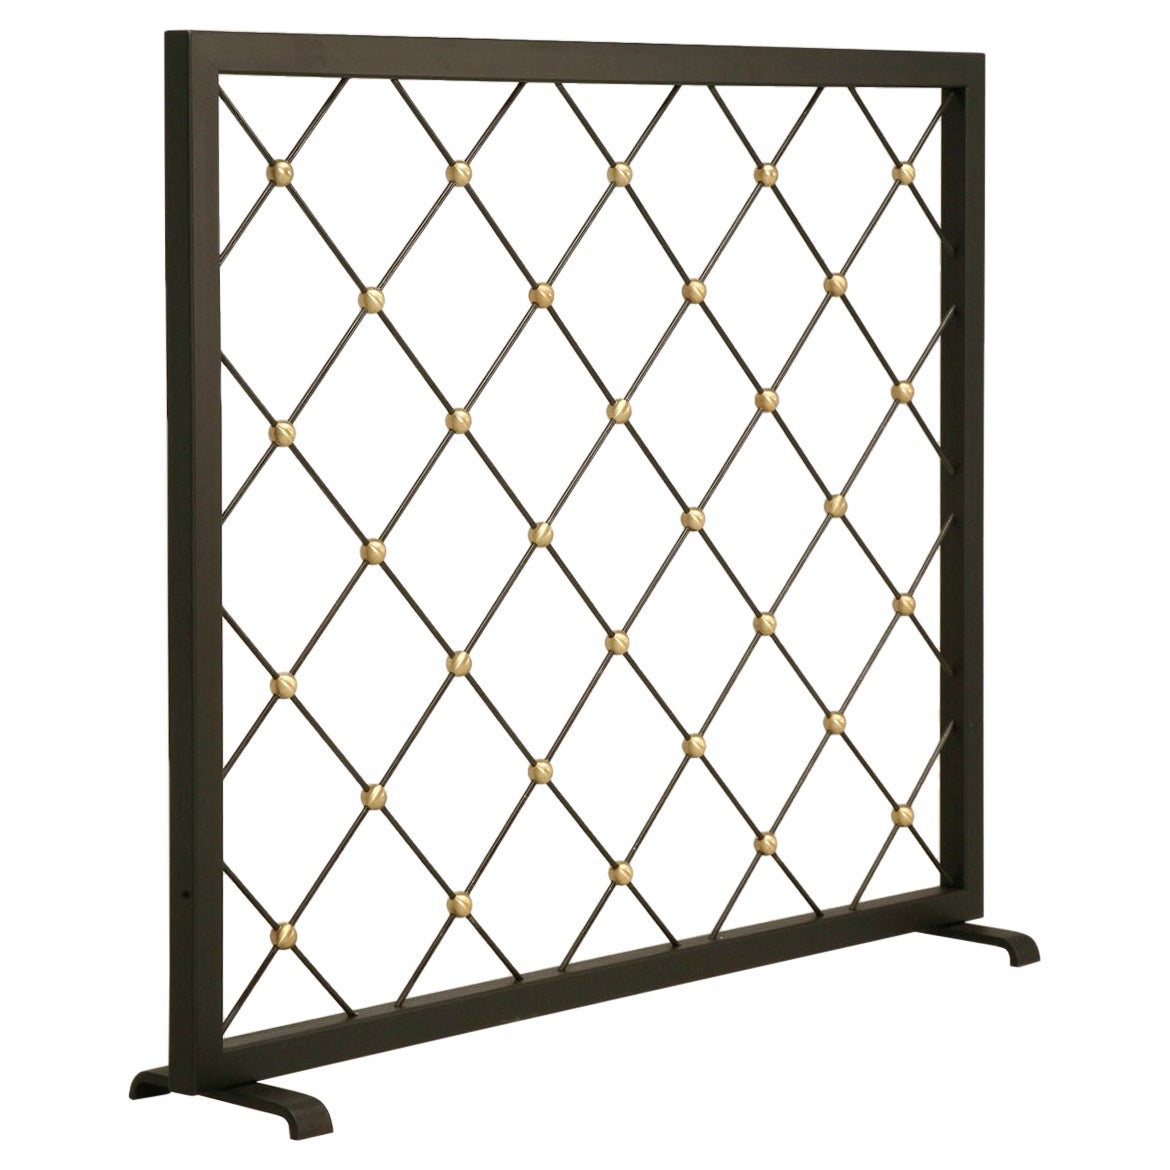 Custom Made to Order Fireplace Screen Mid-Century Modern Style Any Dimension For Sale